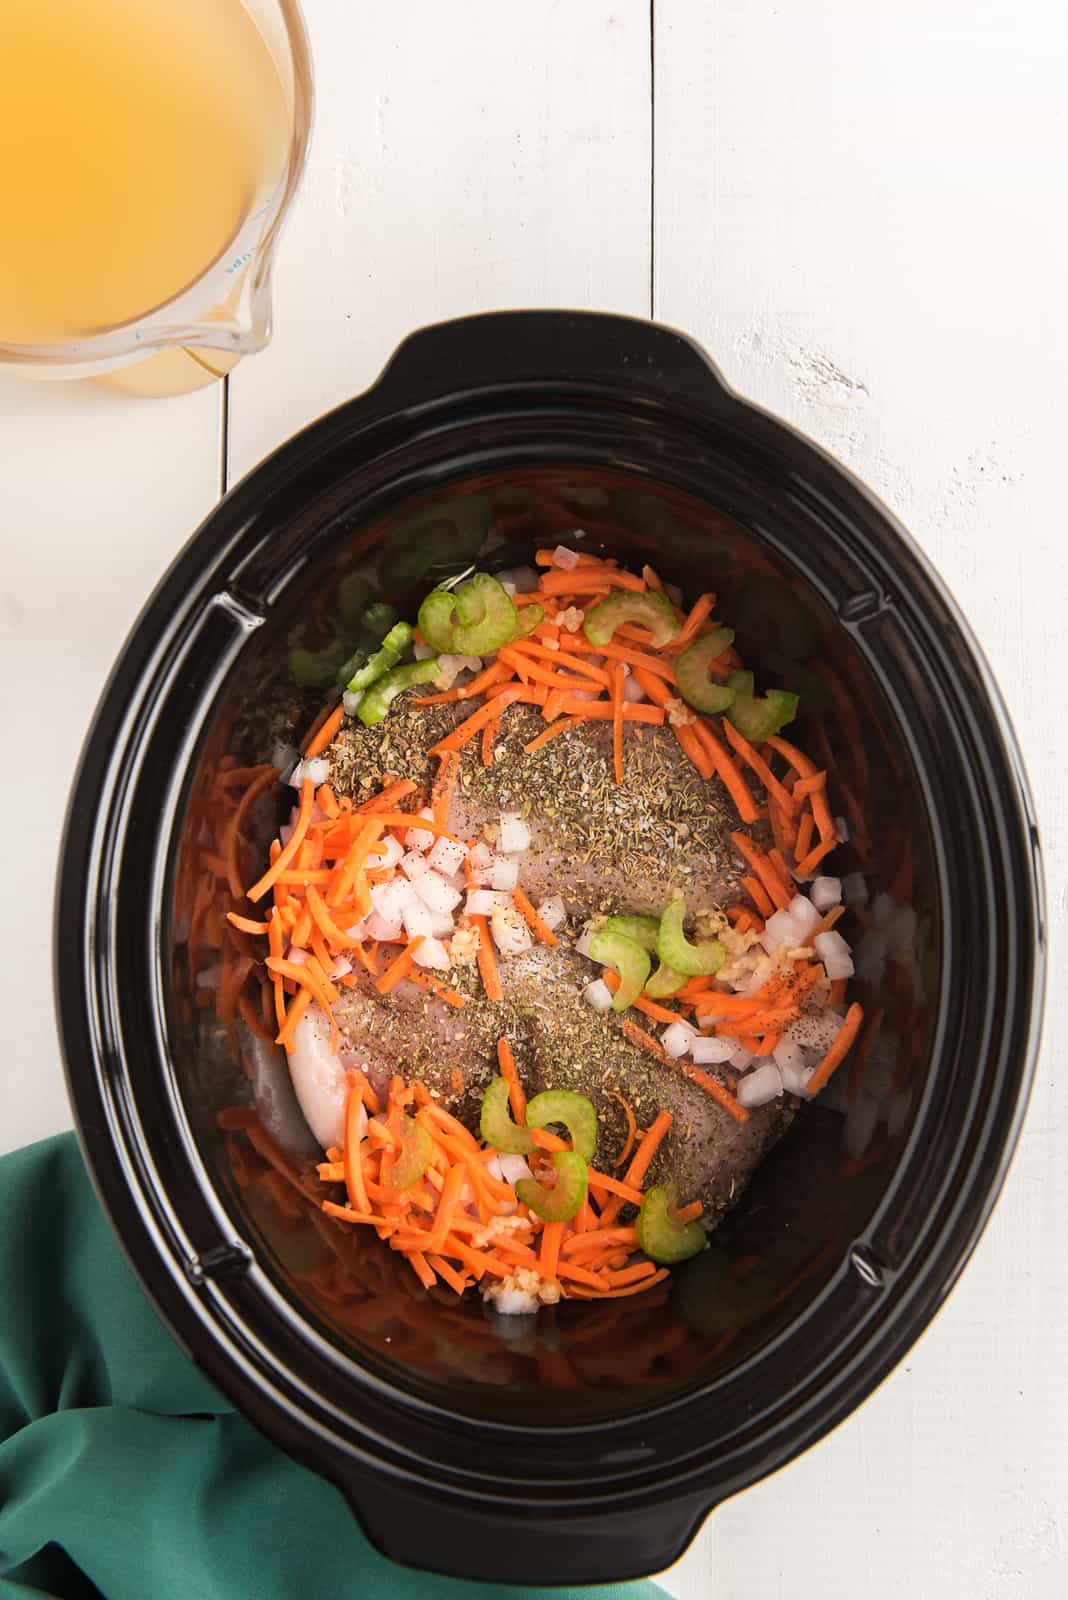 Vegetable, chicken and spice in crock pot.